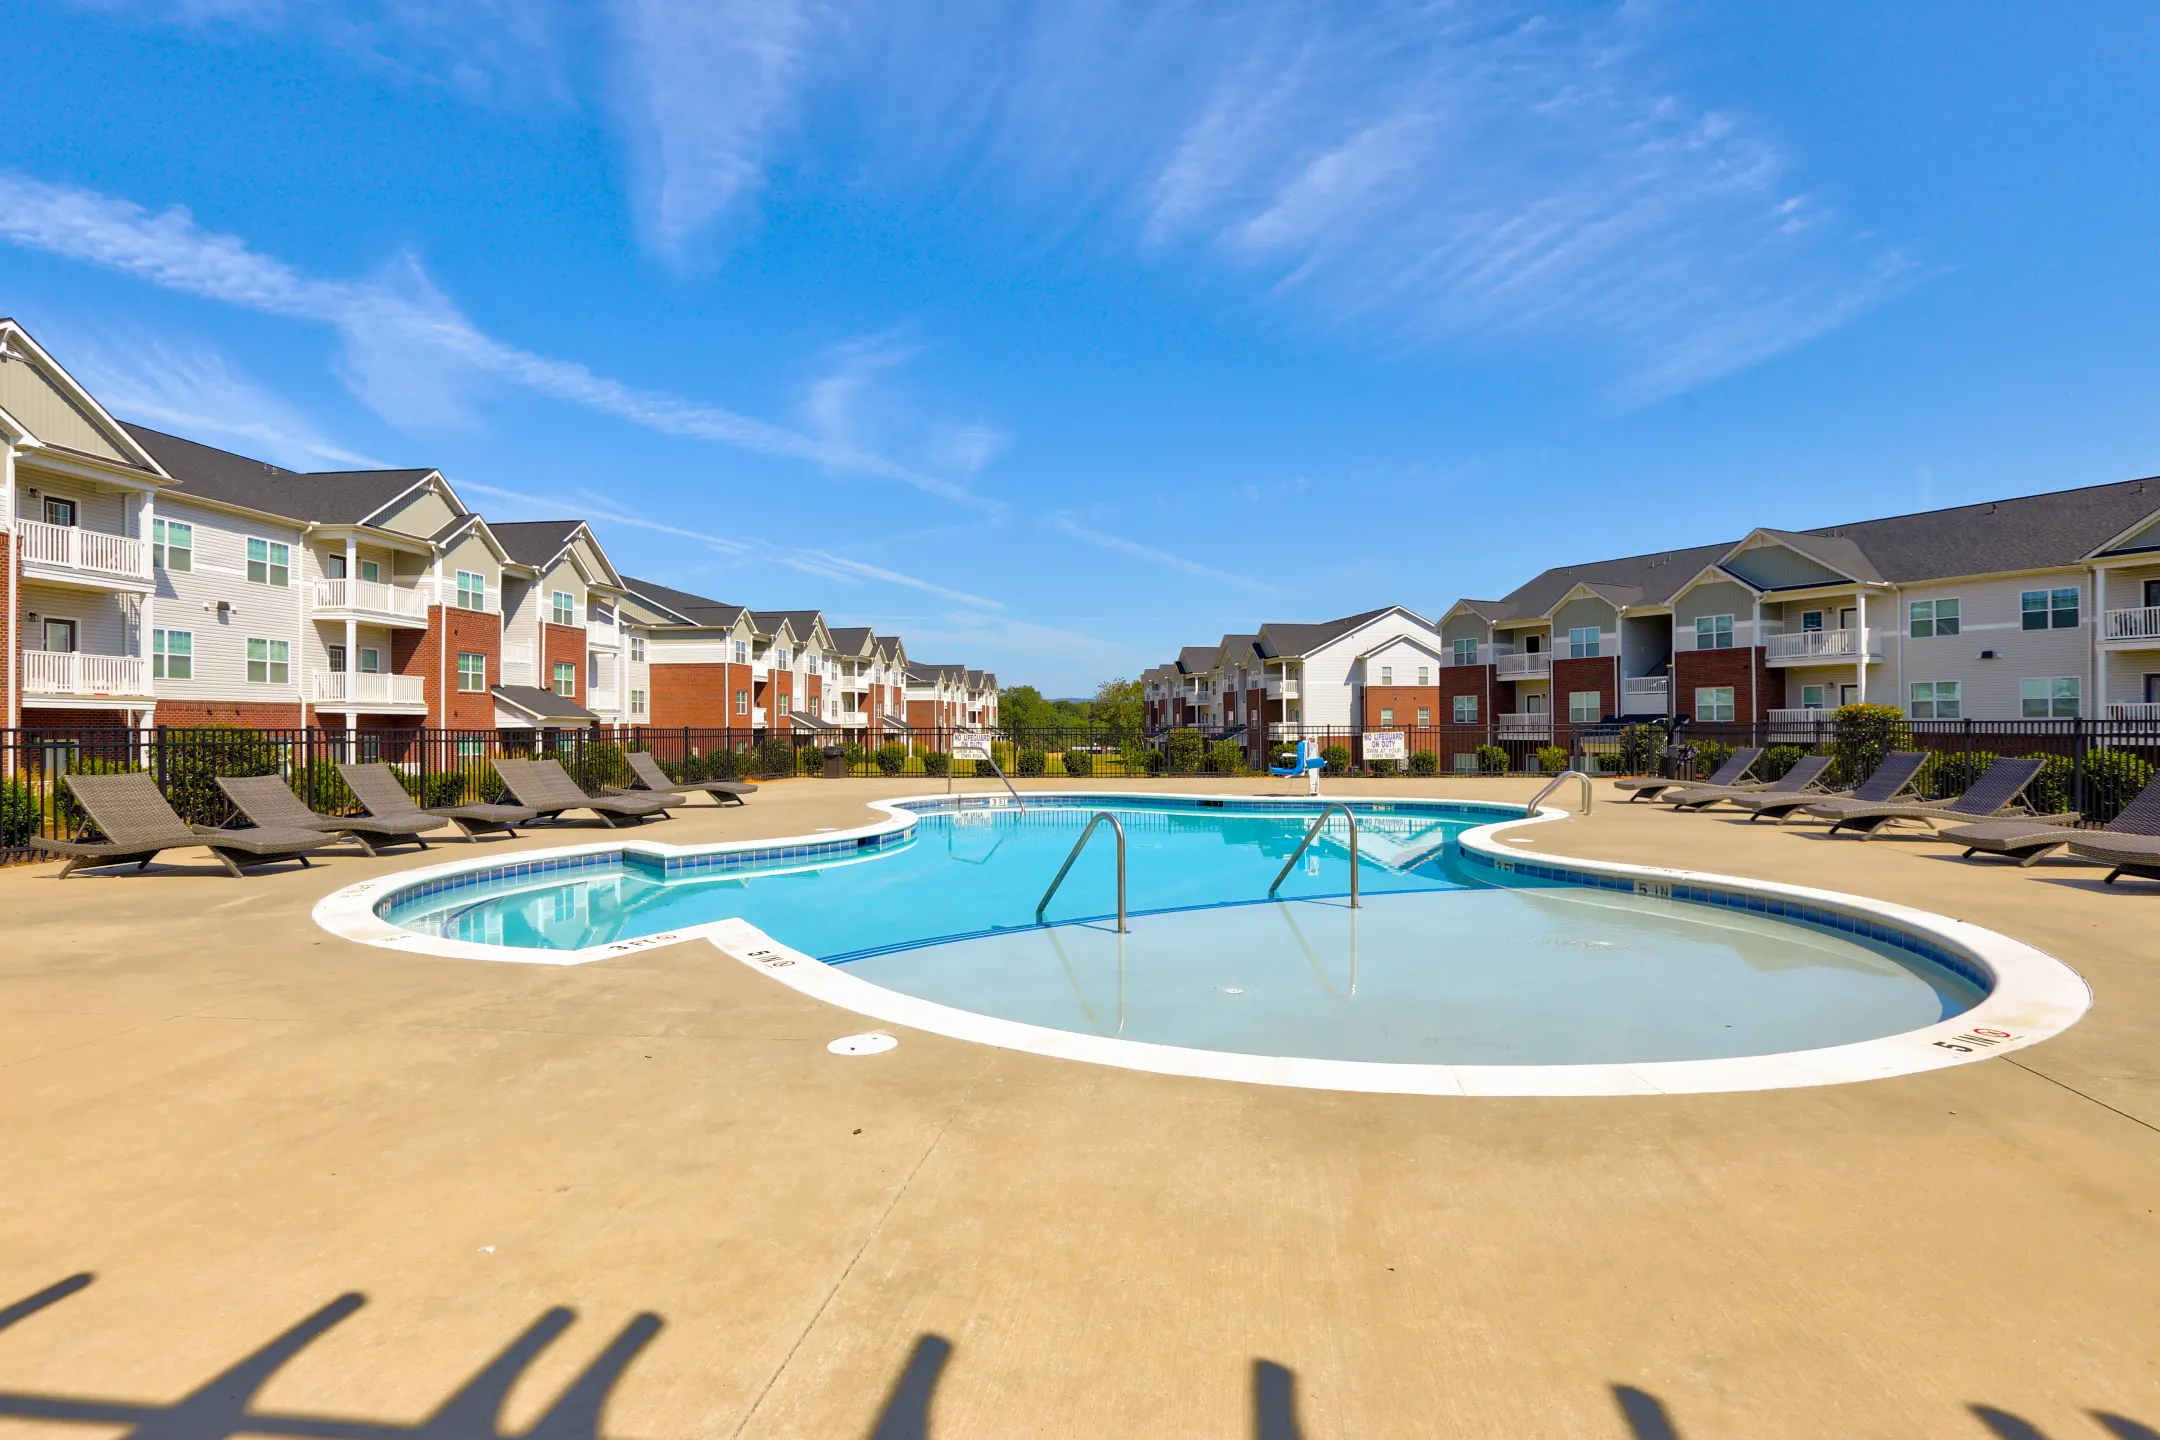 Pool - Assembly Apartments - Greenville, SC